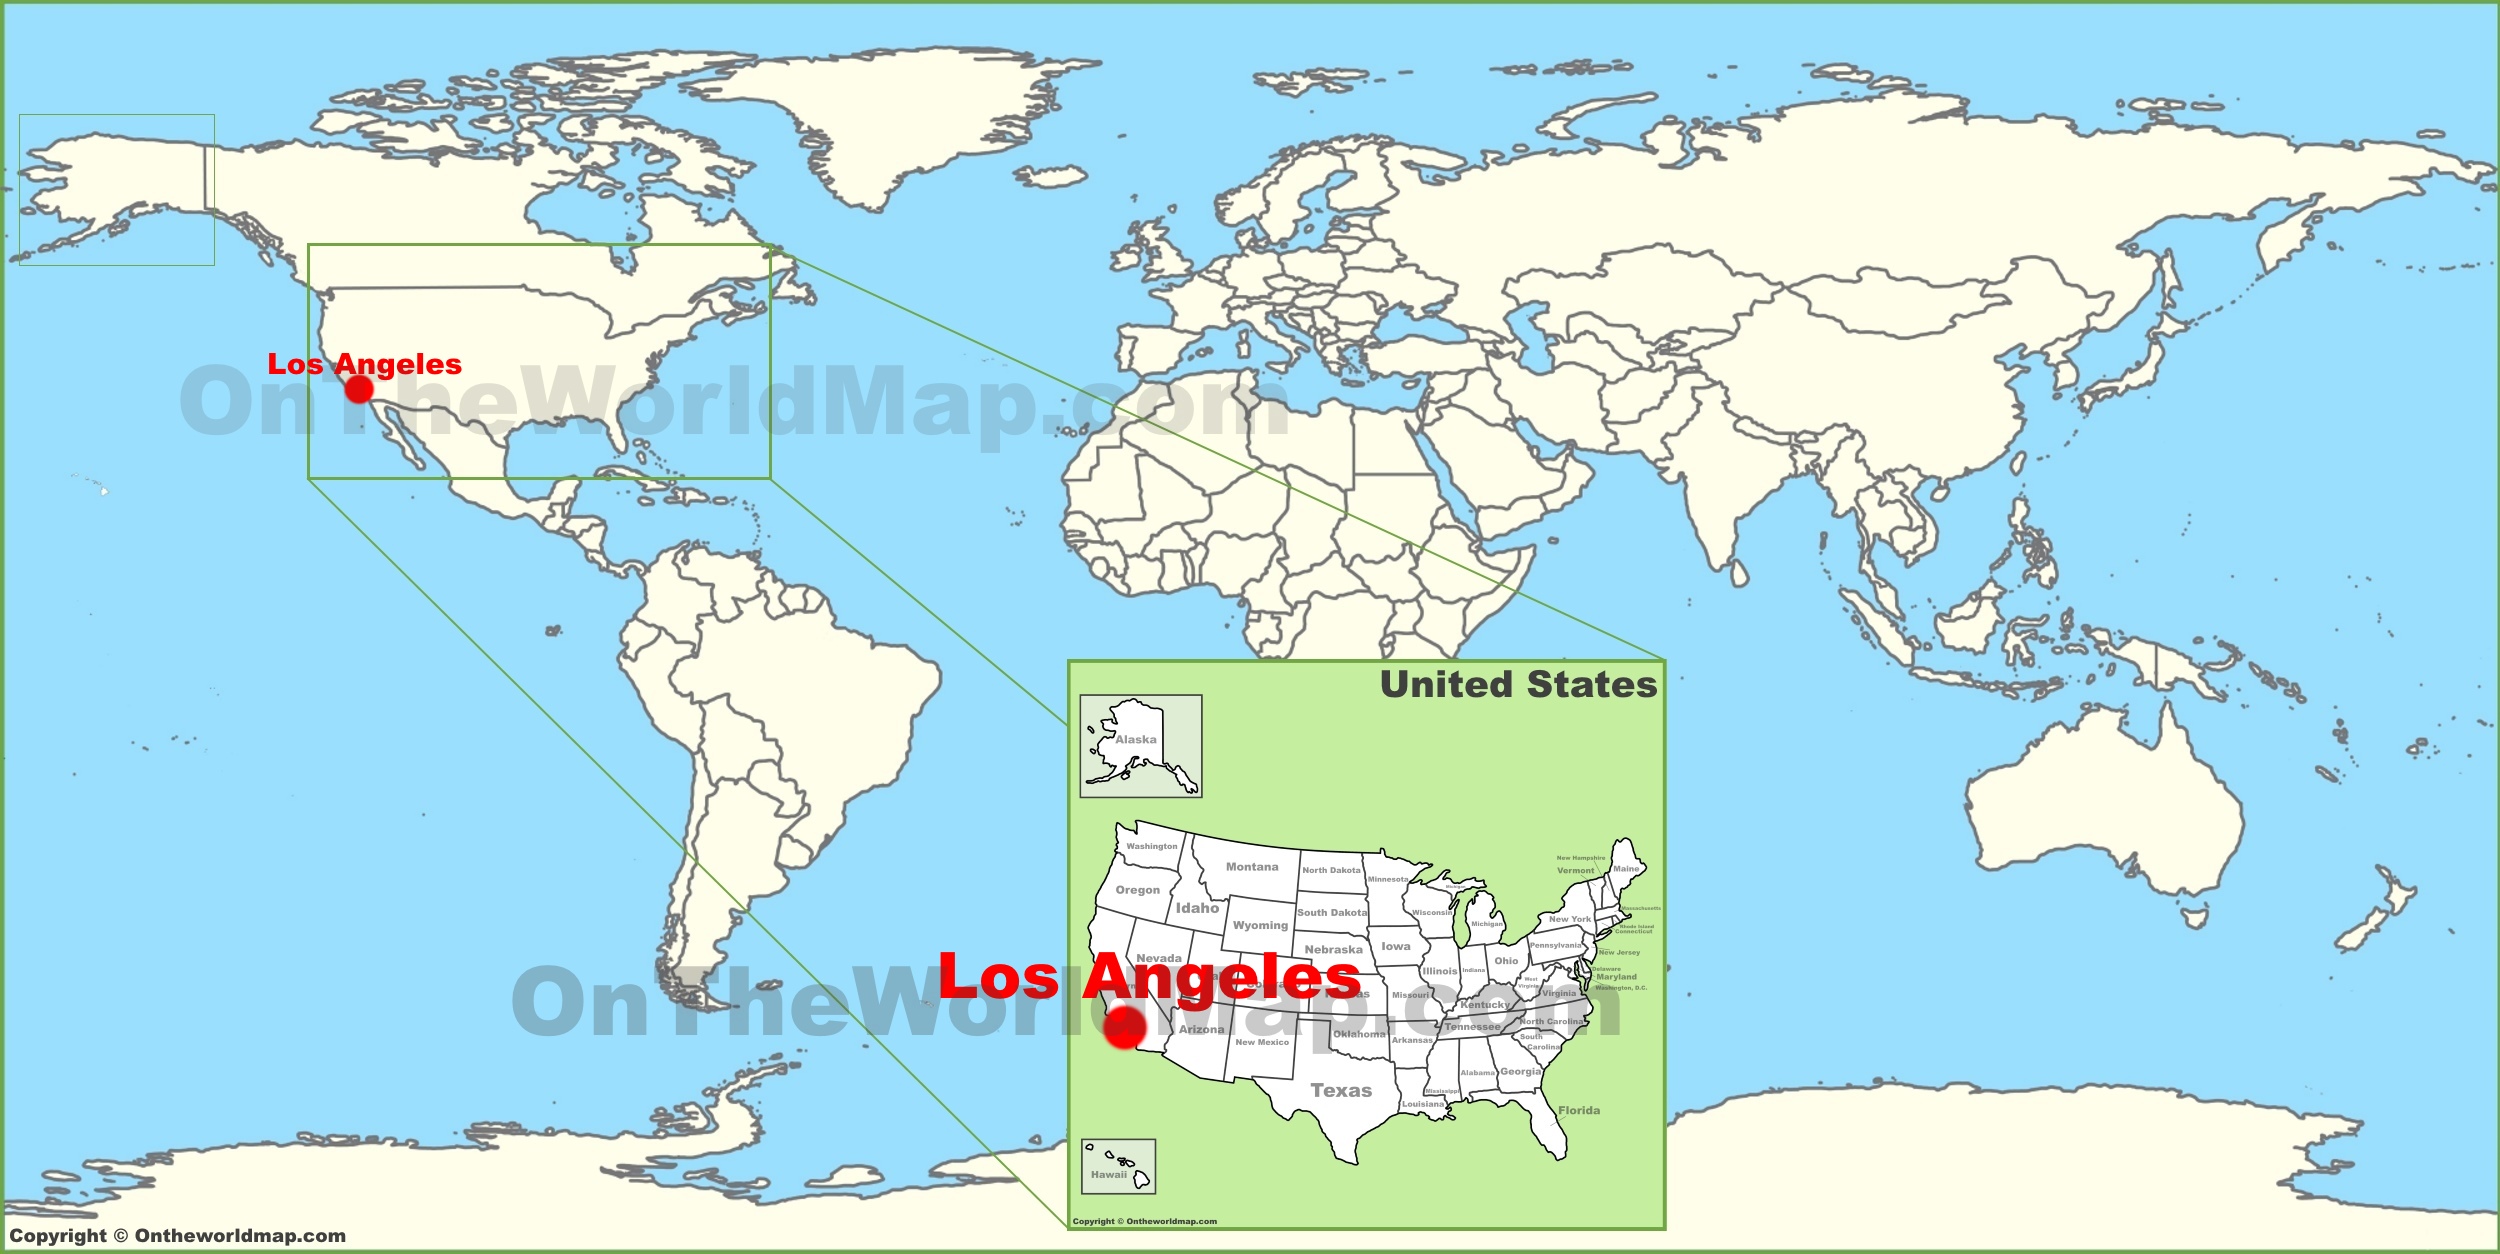 Los Angeles On The World Map